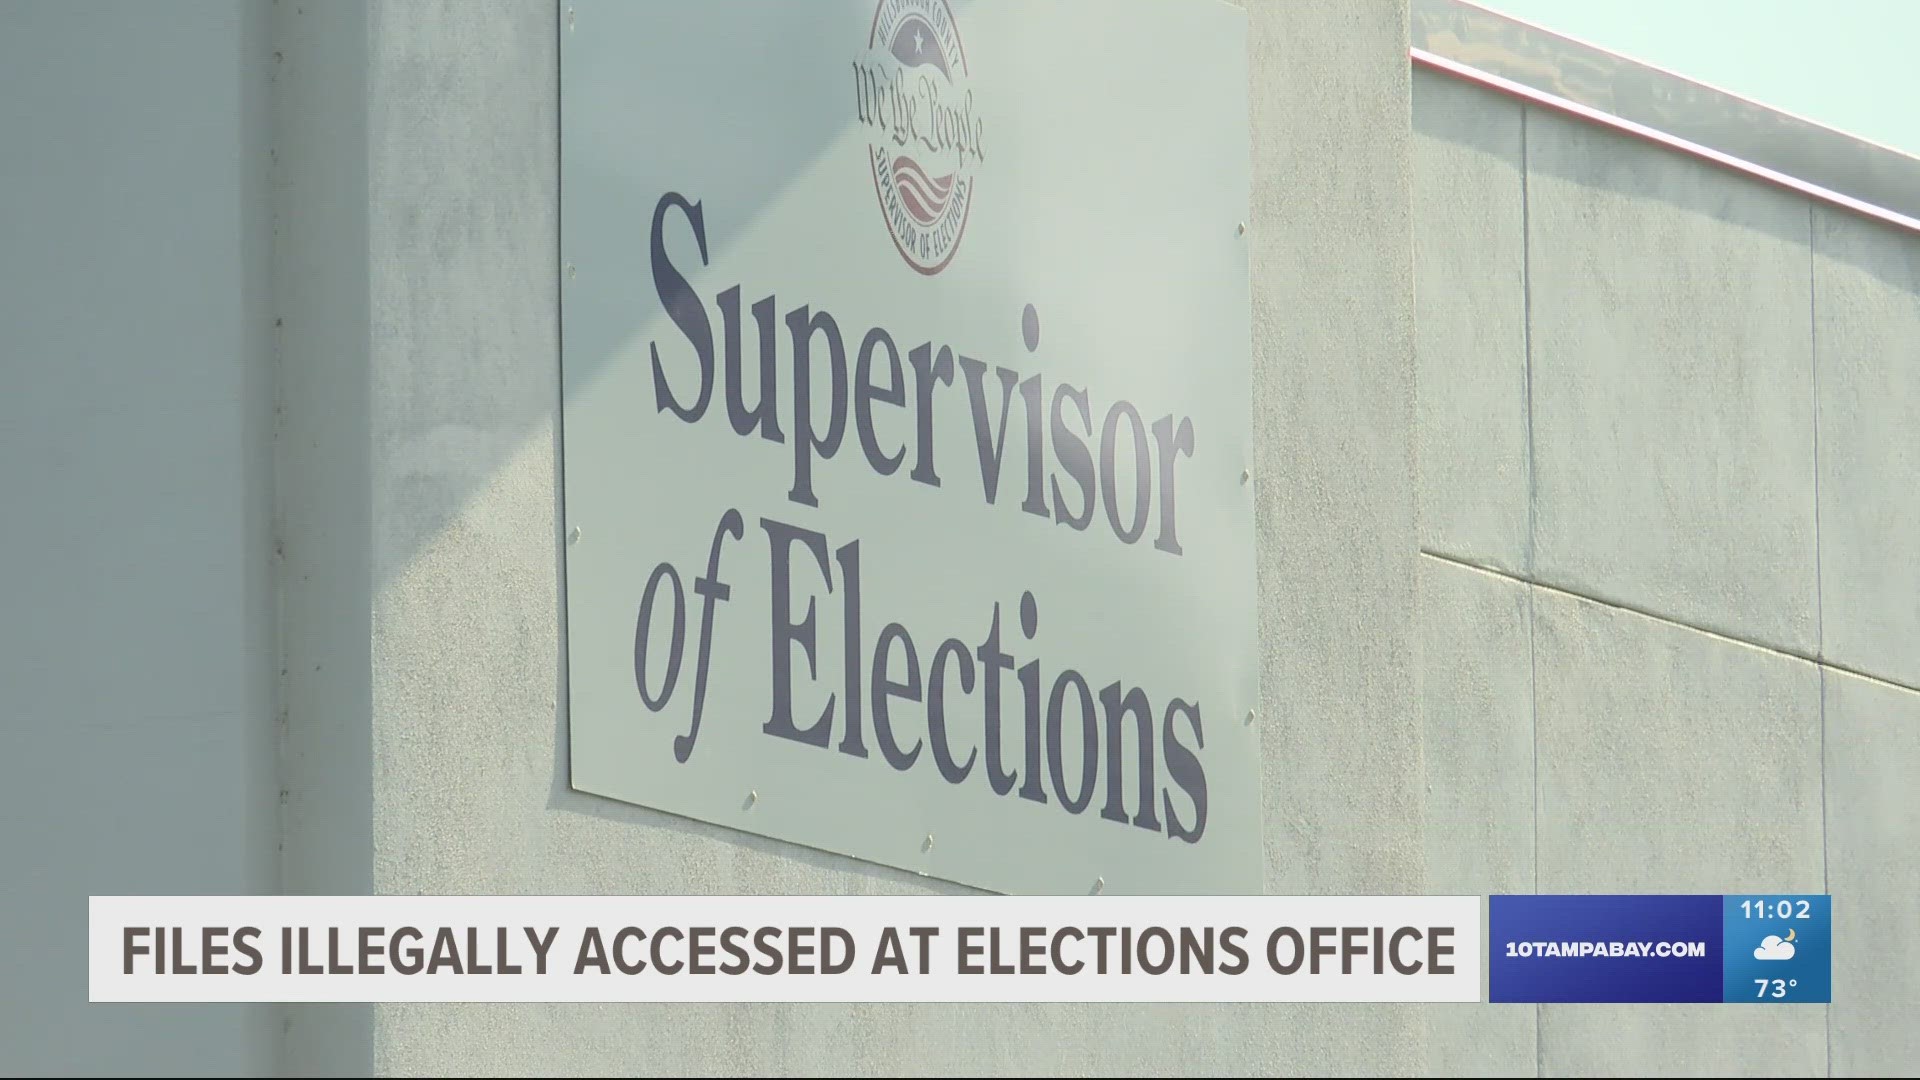 The unauthorized user reportedly didn't have access to the voter registration system or the ballot tabulation system.